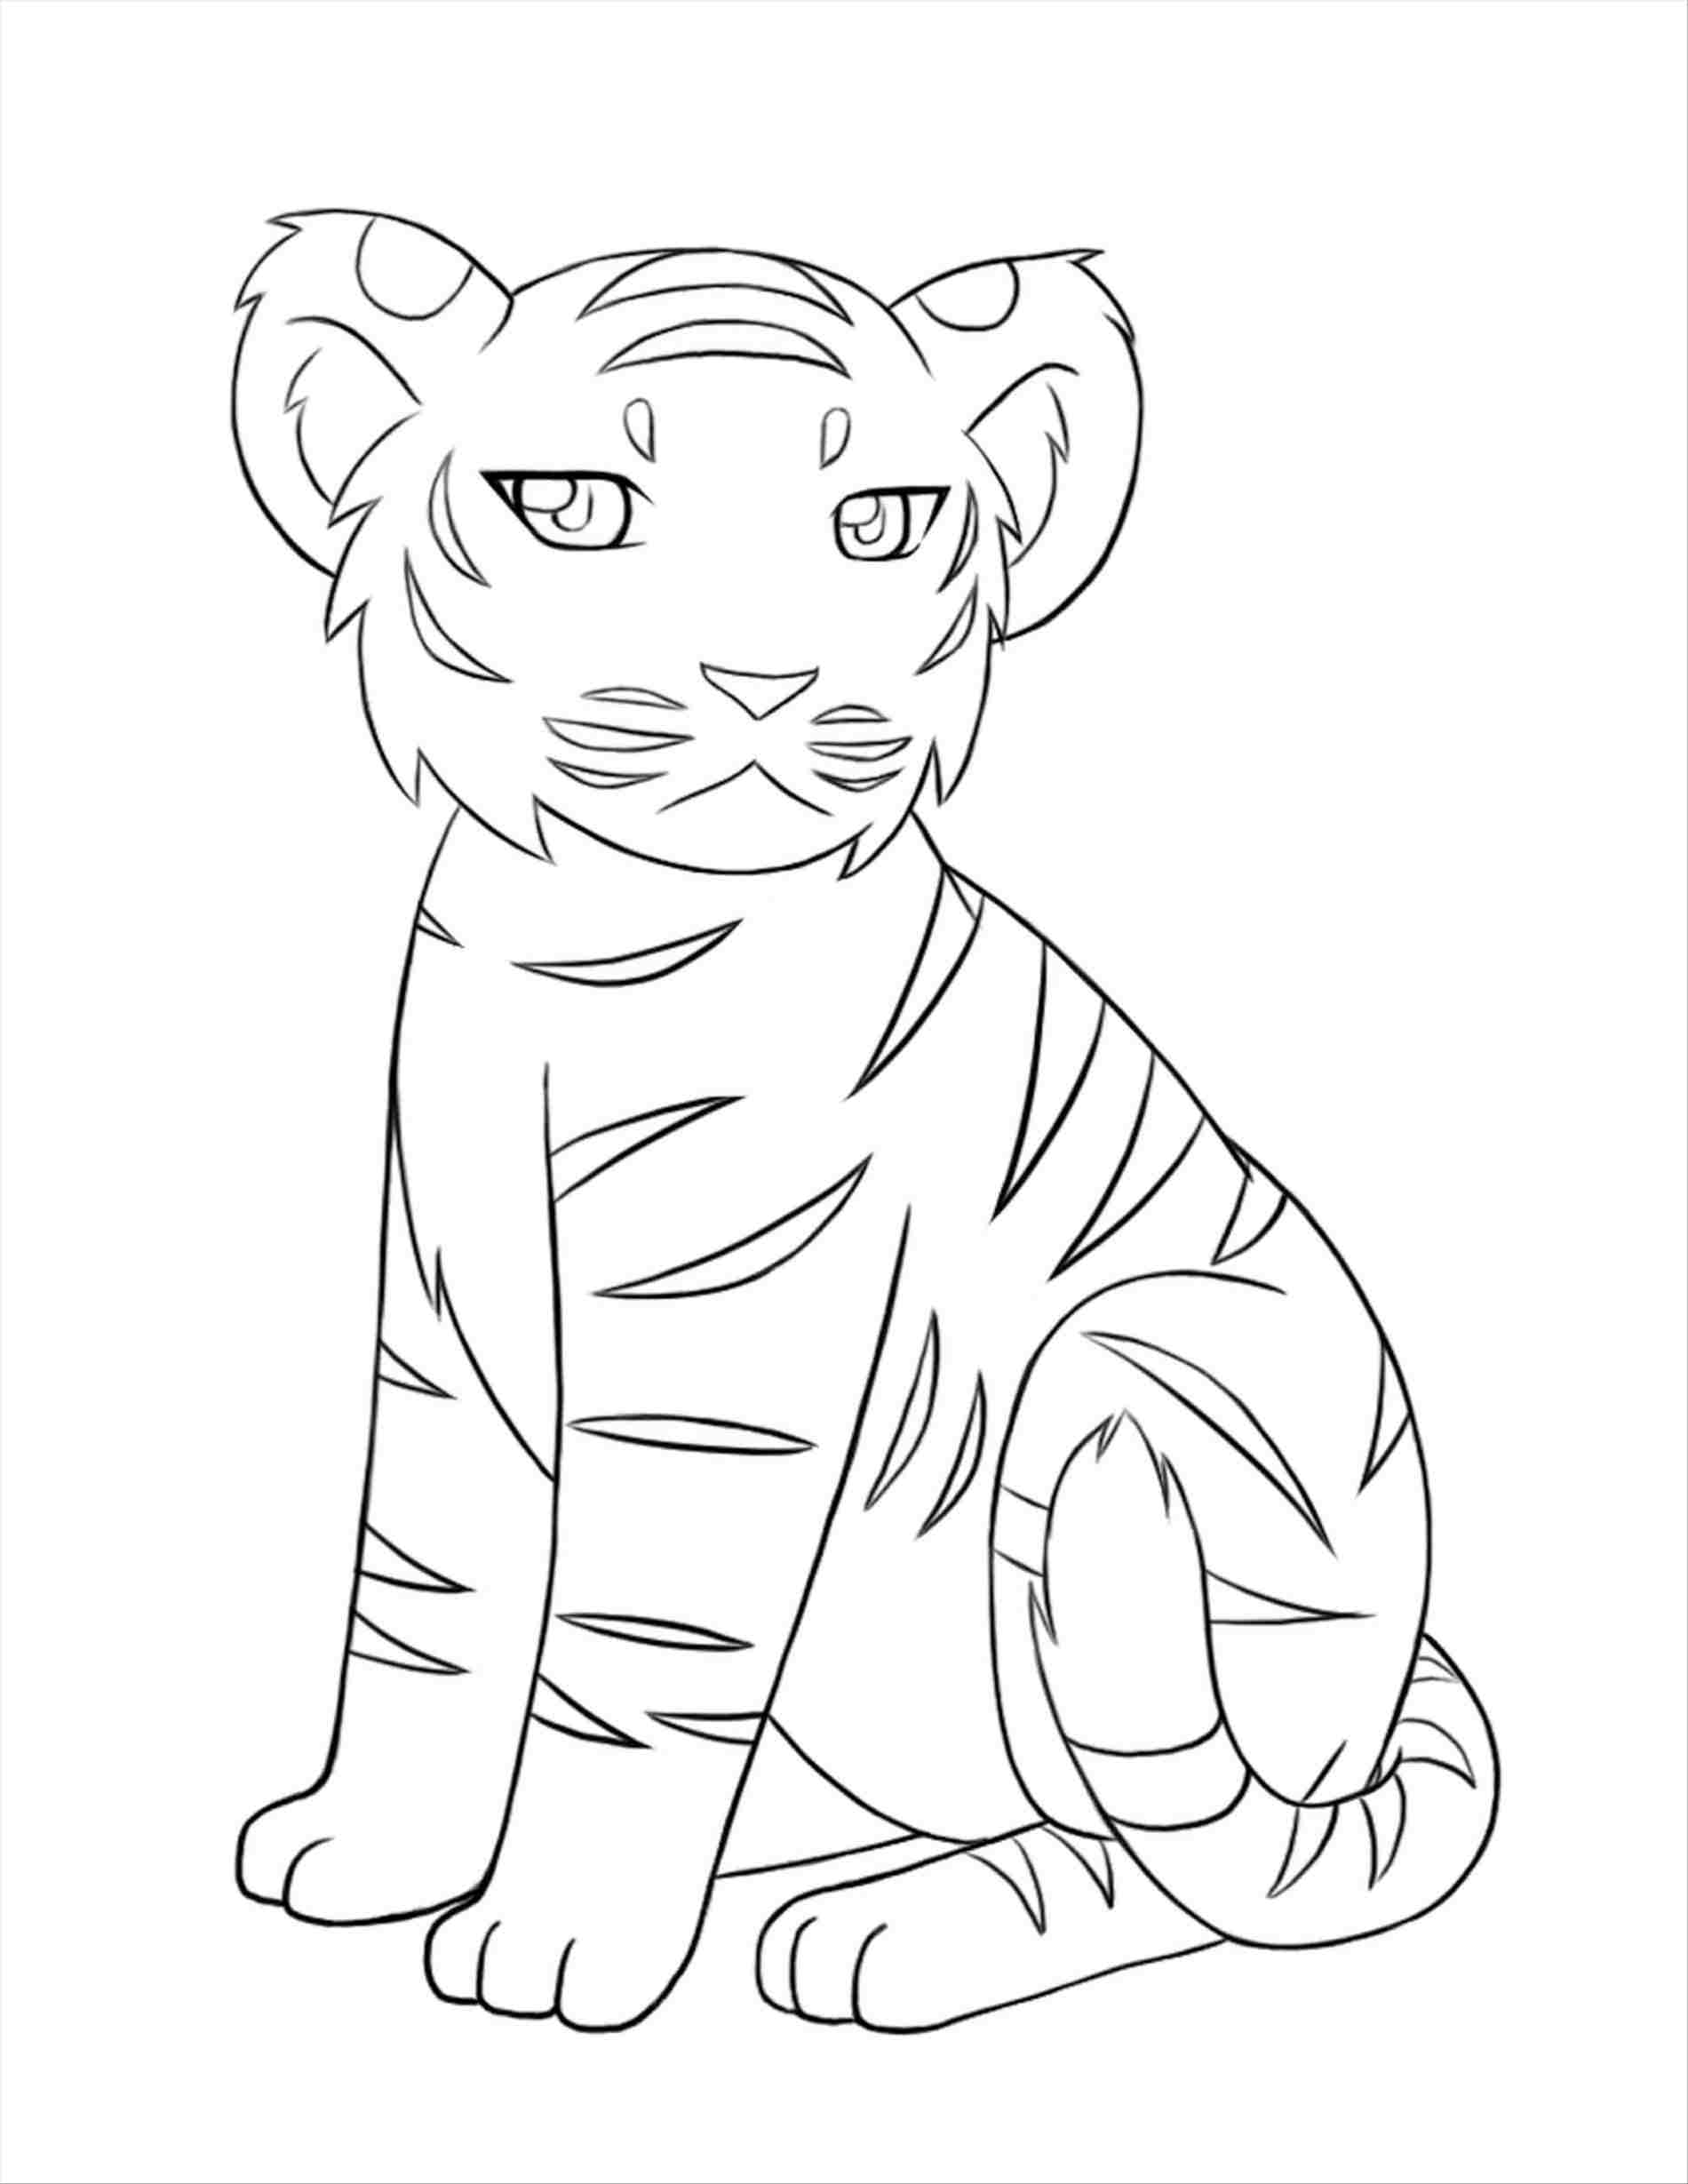 How To Draw Tiger Sitting